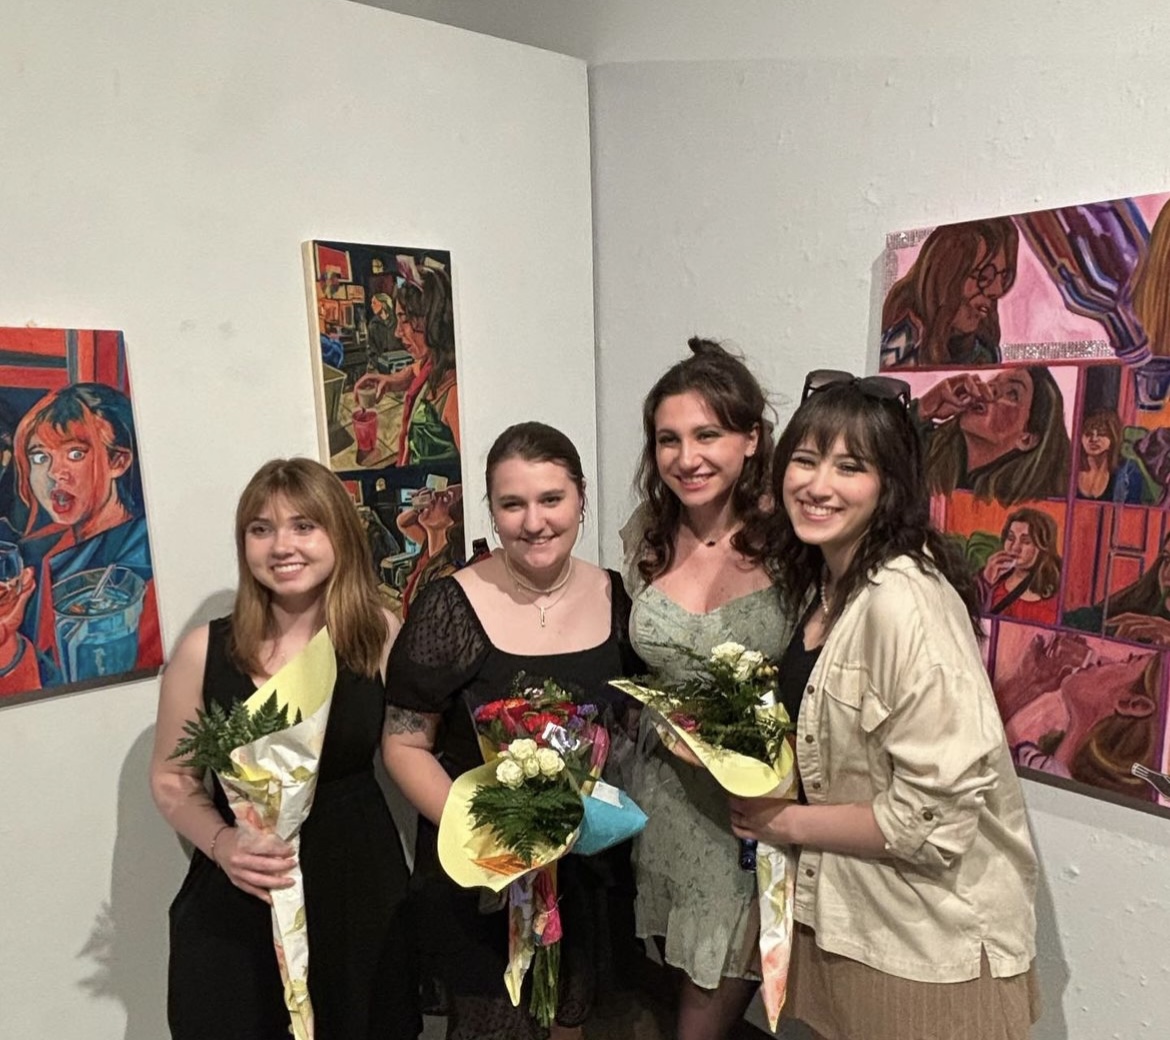 %28From+right+to+left%29+Melanie+Schaefer+and+Gianna+Velotta+are+posing+with+Velottas+artwork+during+their+Capstone+exhibition.%0A